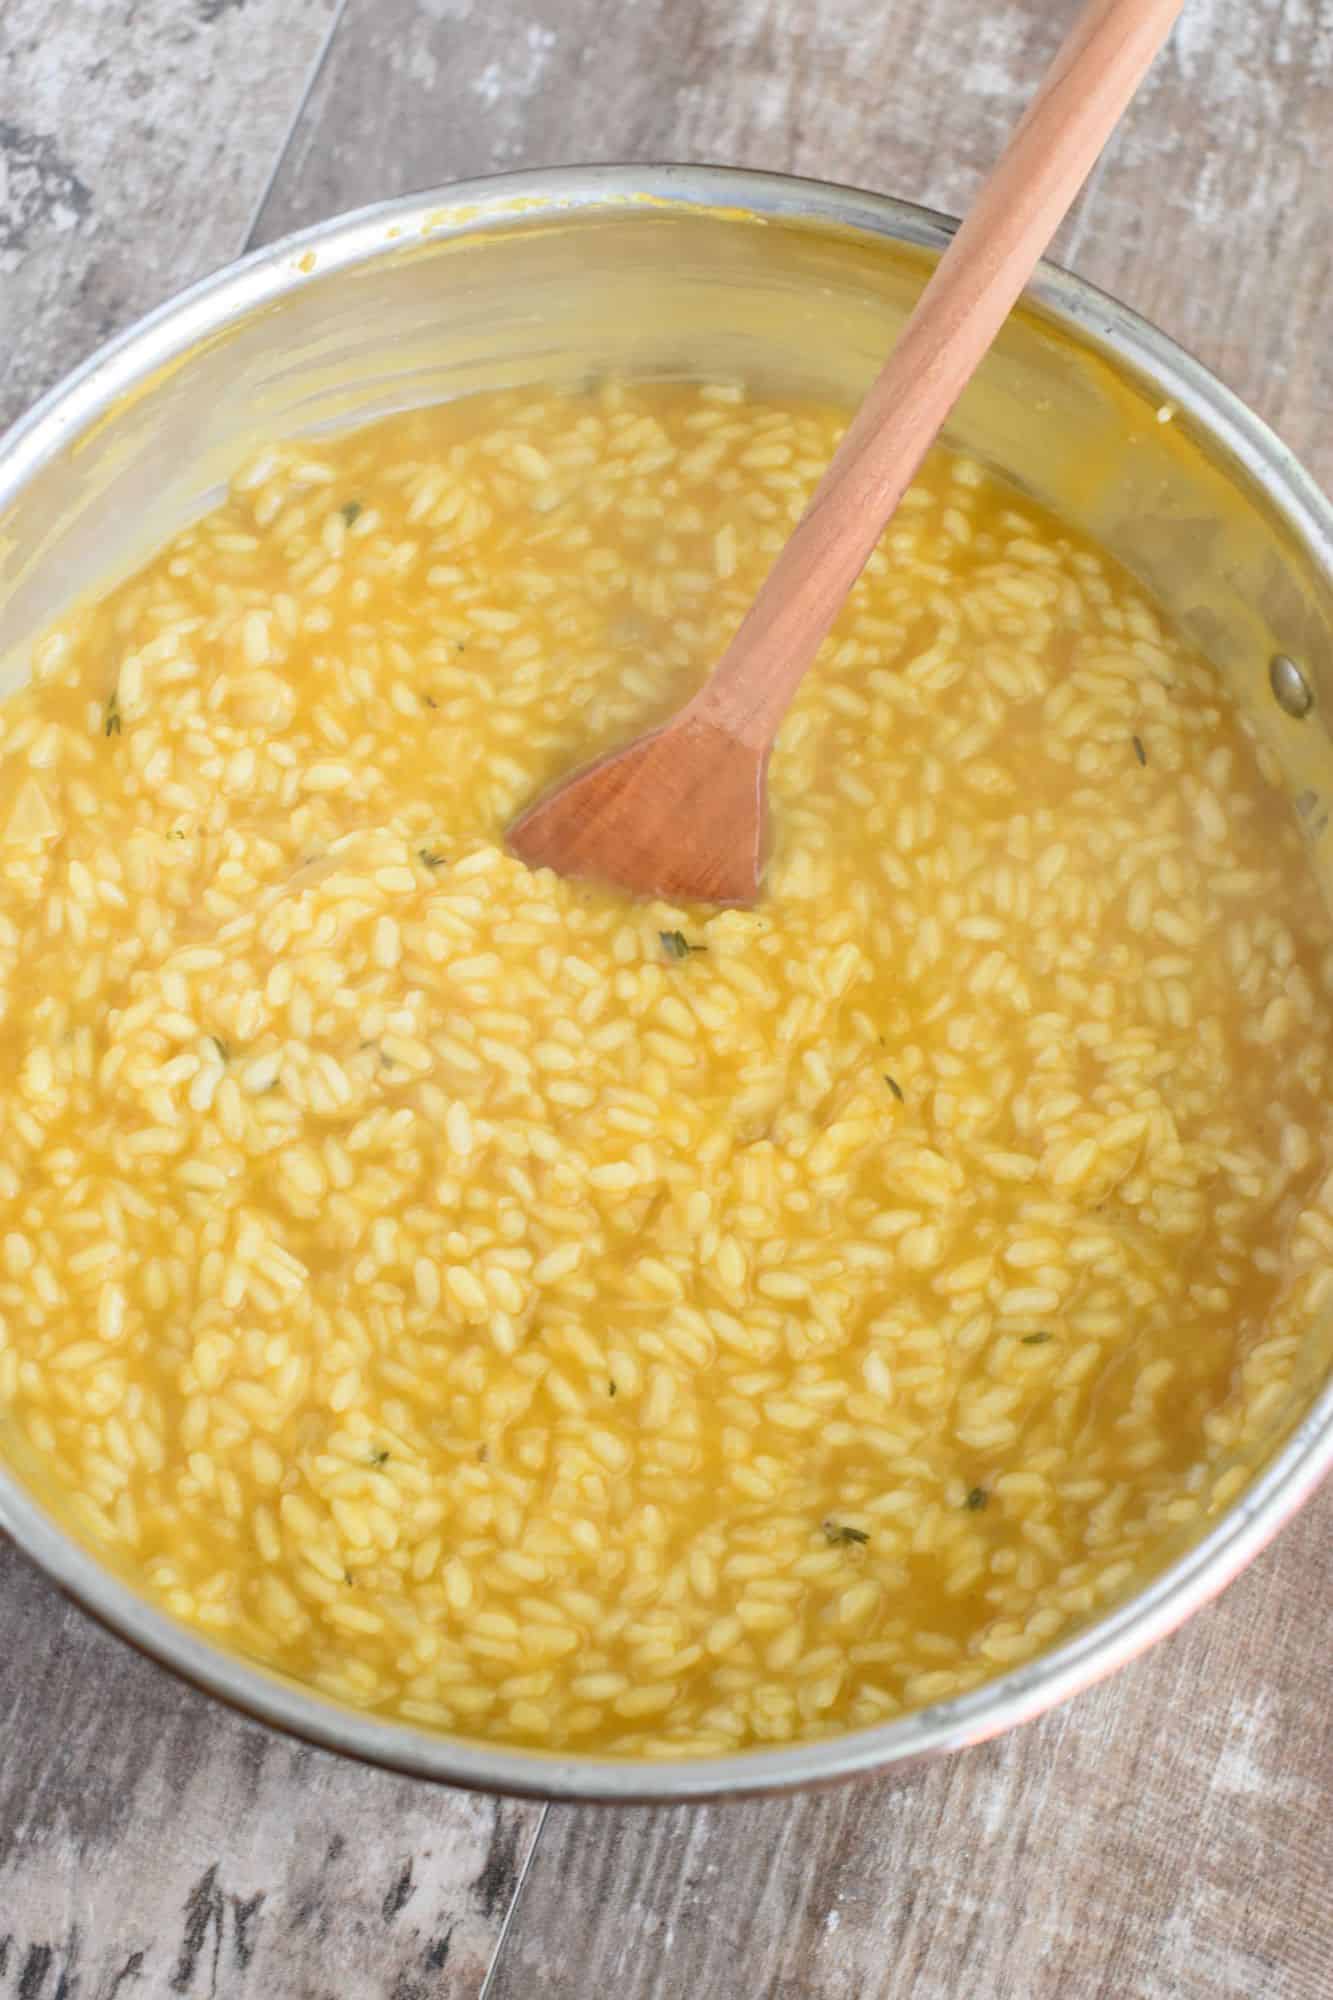 risotto in the pan with a wooden spoon before adding the nutritional yeast and cheese